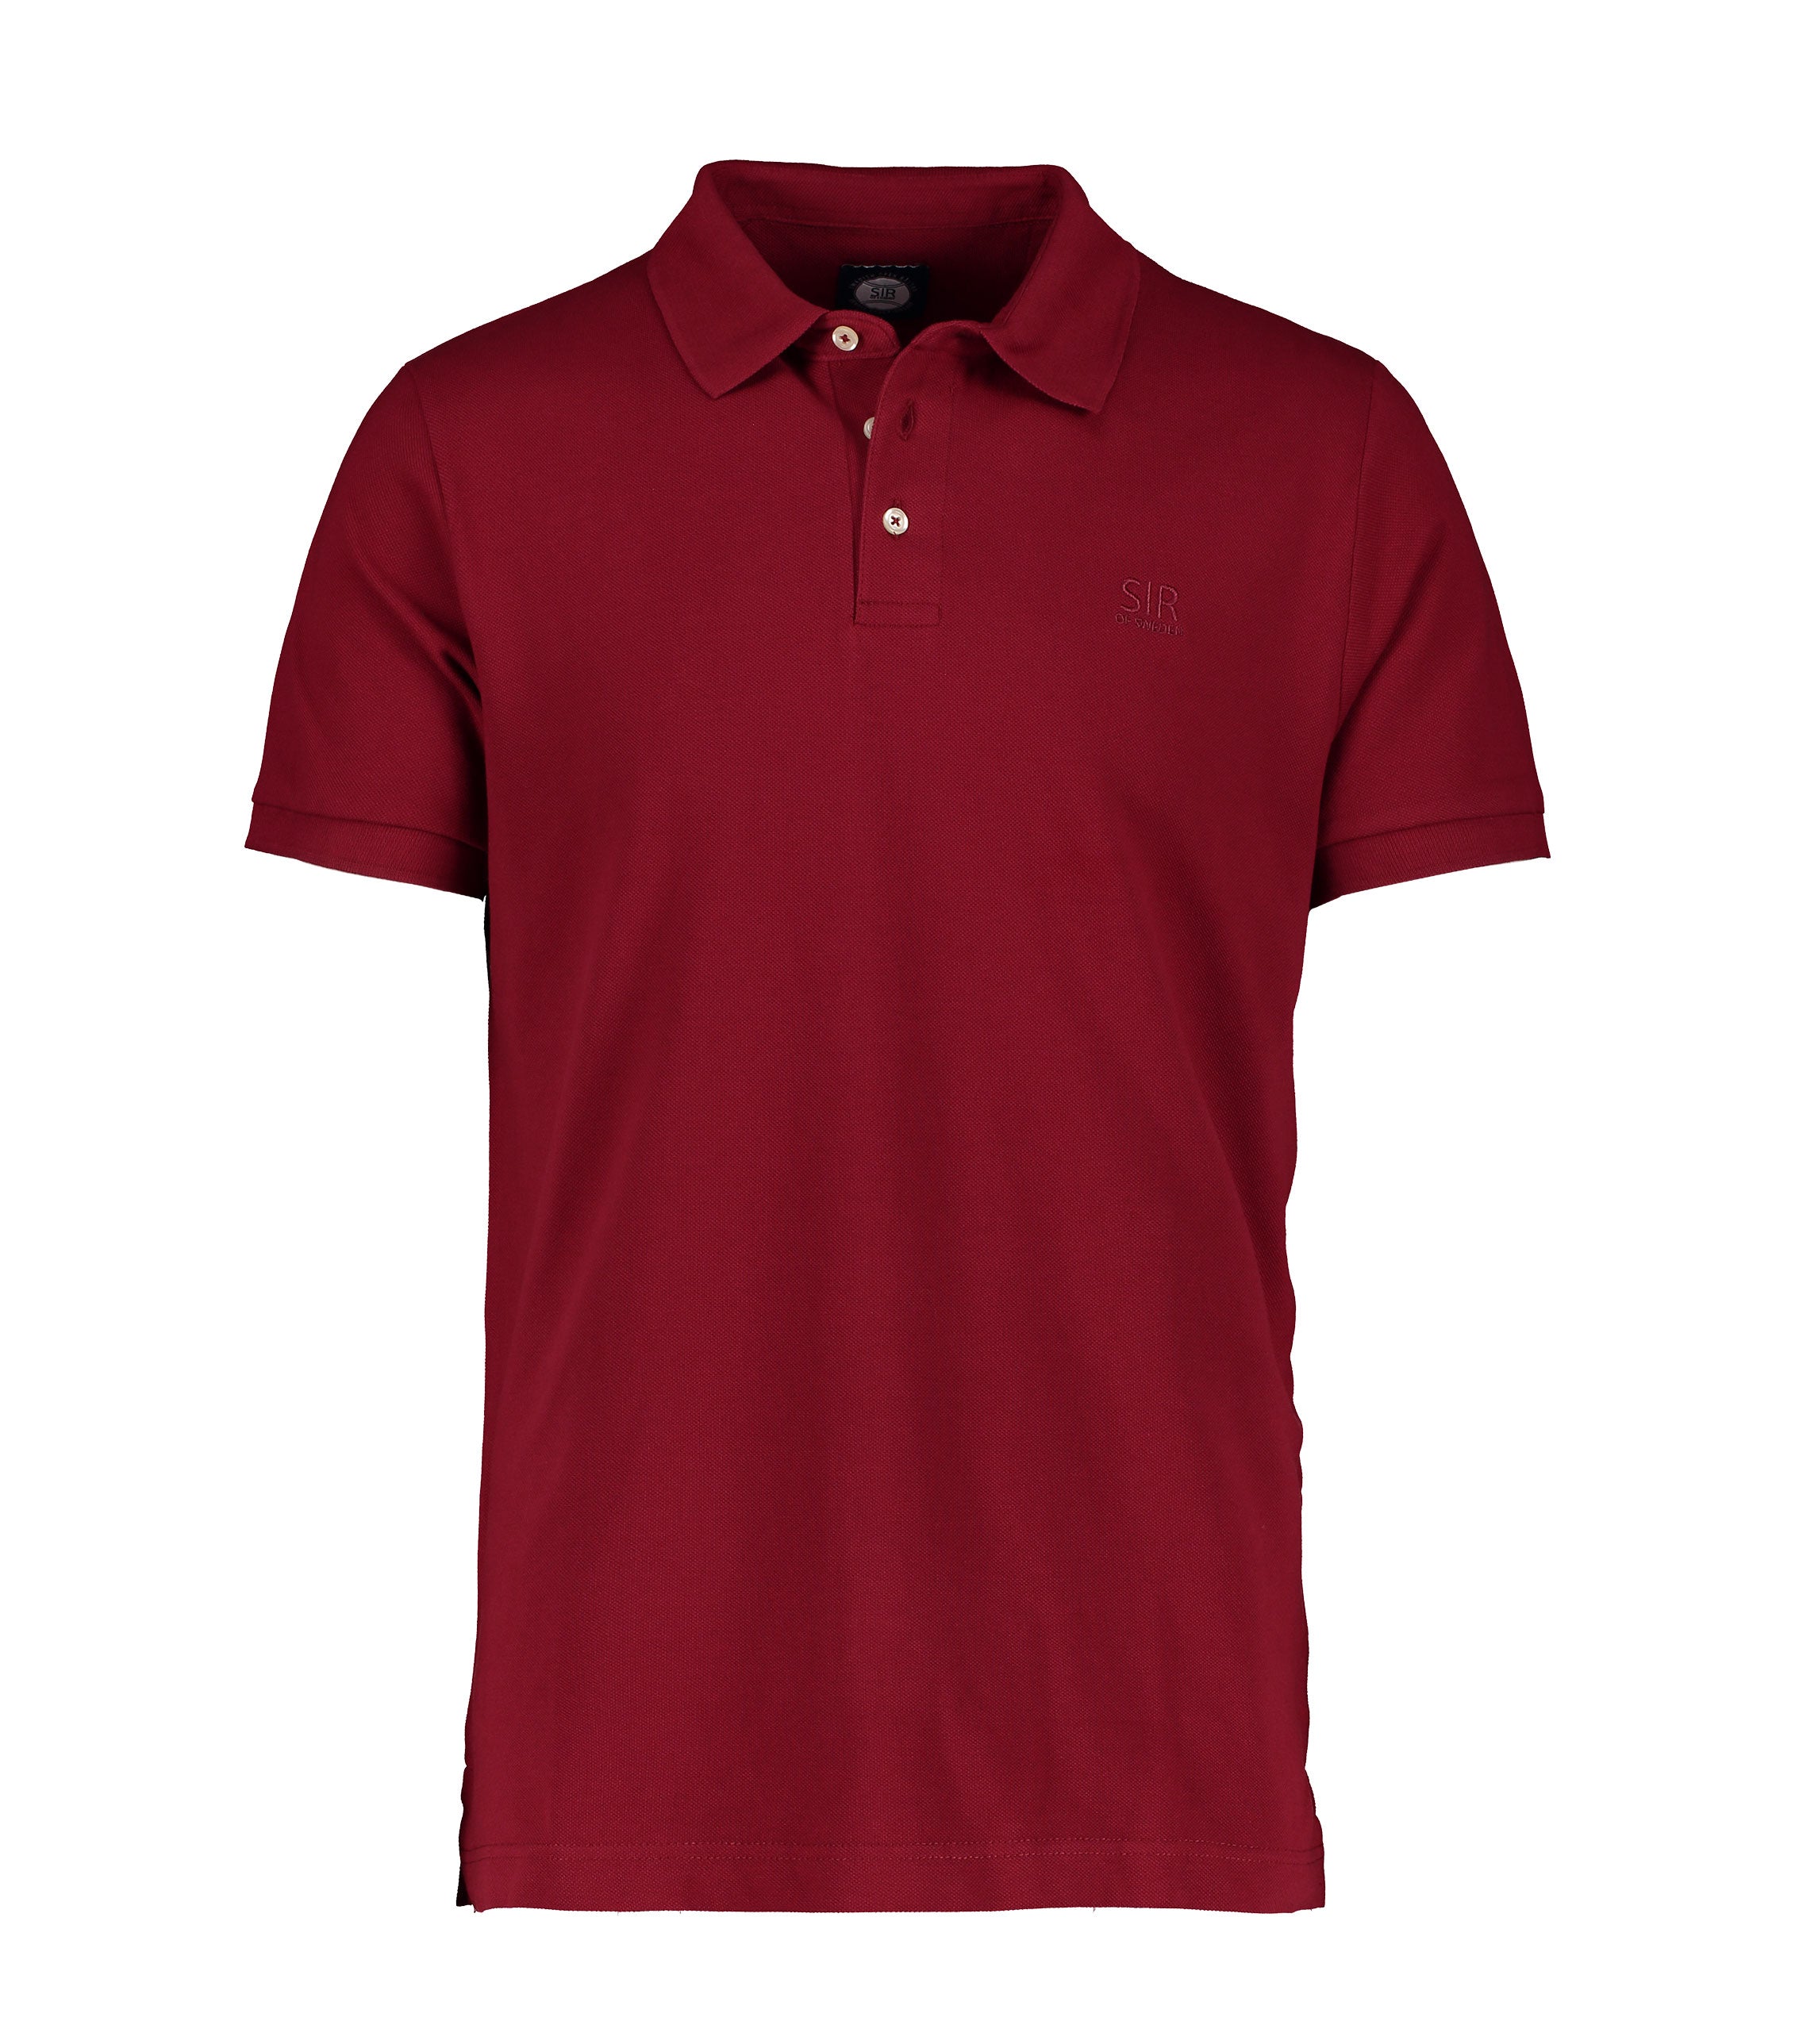 Pernfors Red Polo Shirt